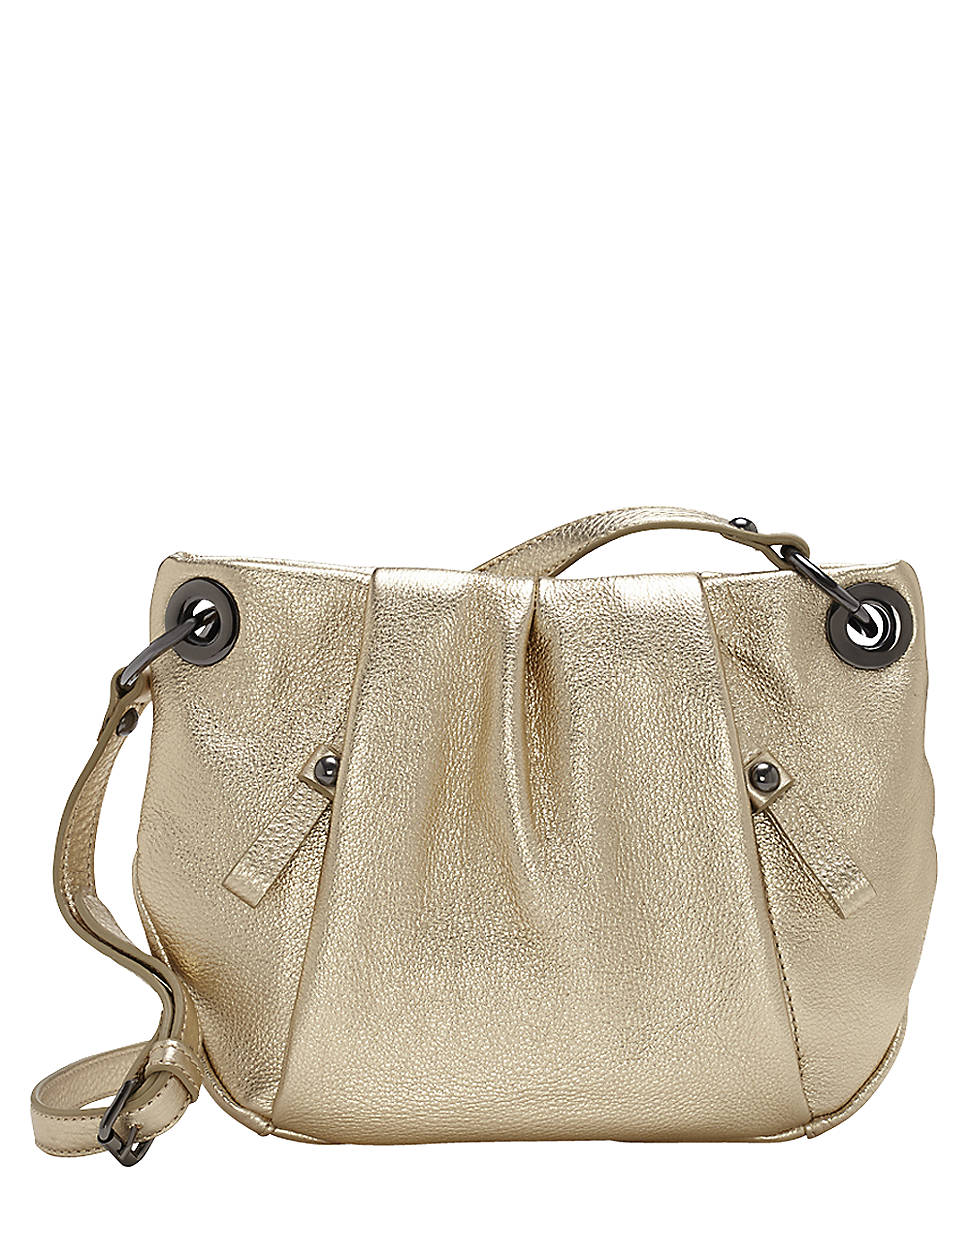 Vince Camuto Cristina Leather Crossbody Bag in Gold | Lyst